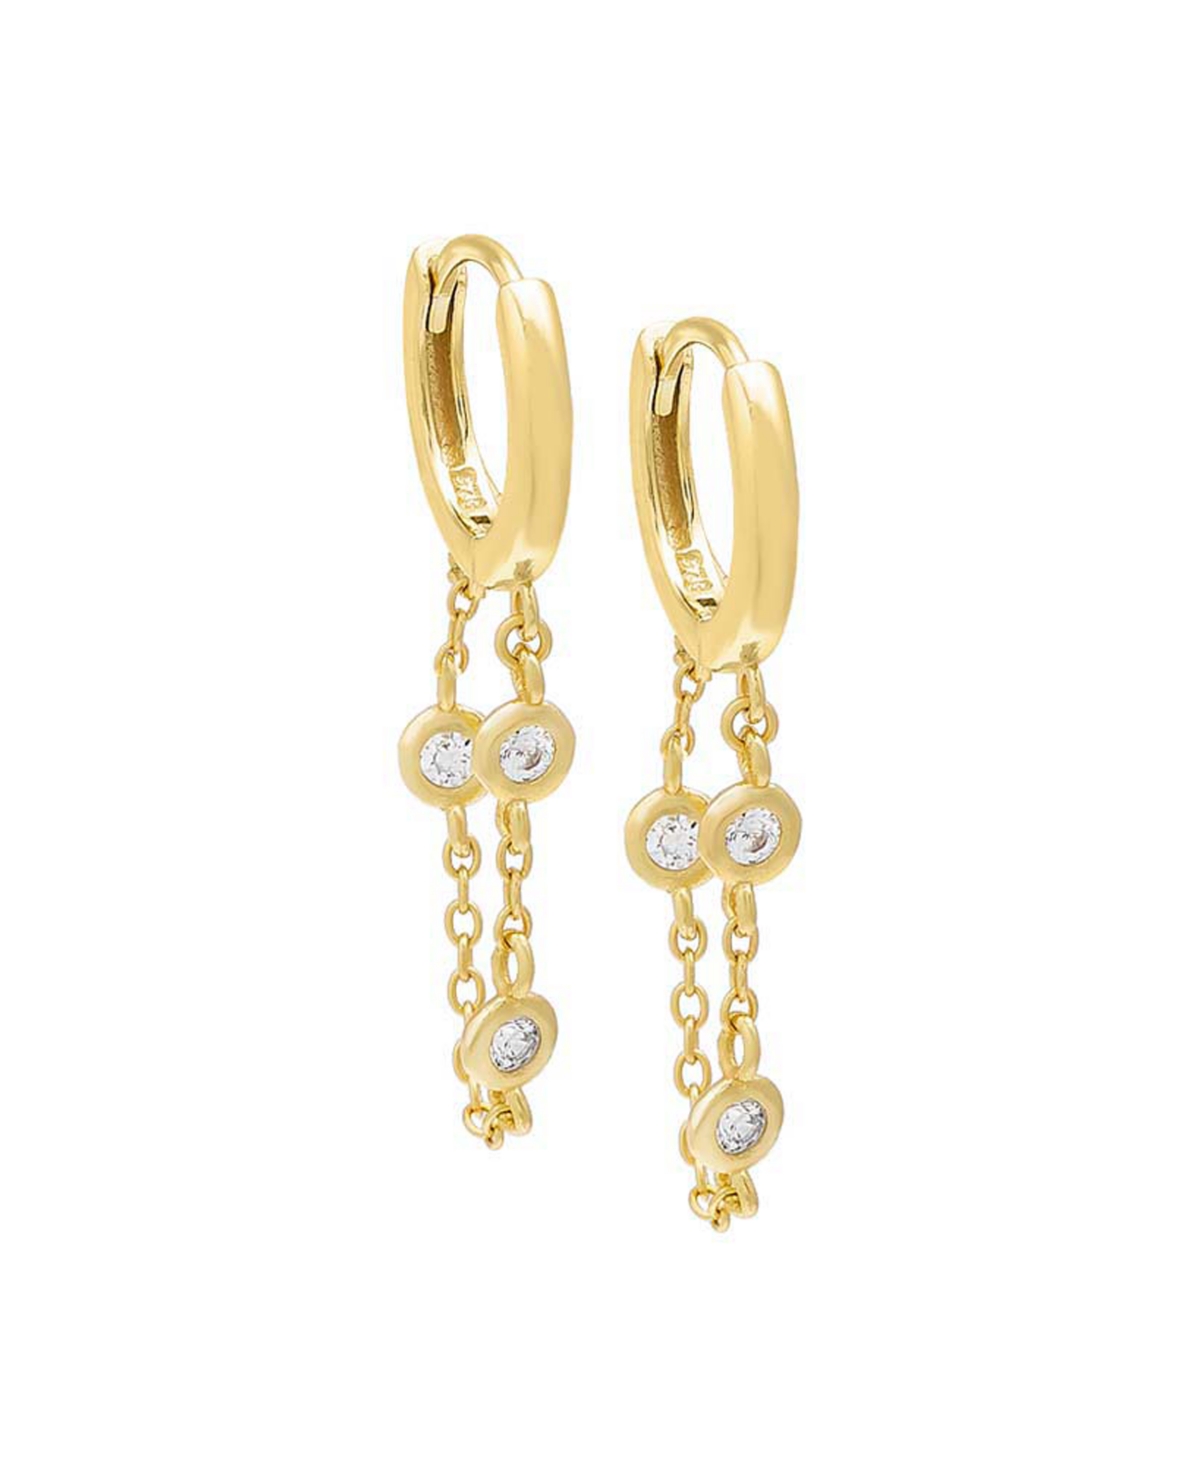 by Adina Eden Cubic Zirconia Bezel Chain Huggie Earrings 14k Gold Plated Over Sterling Silver